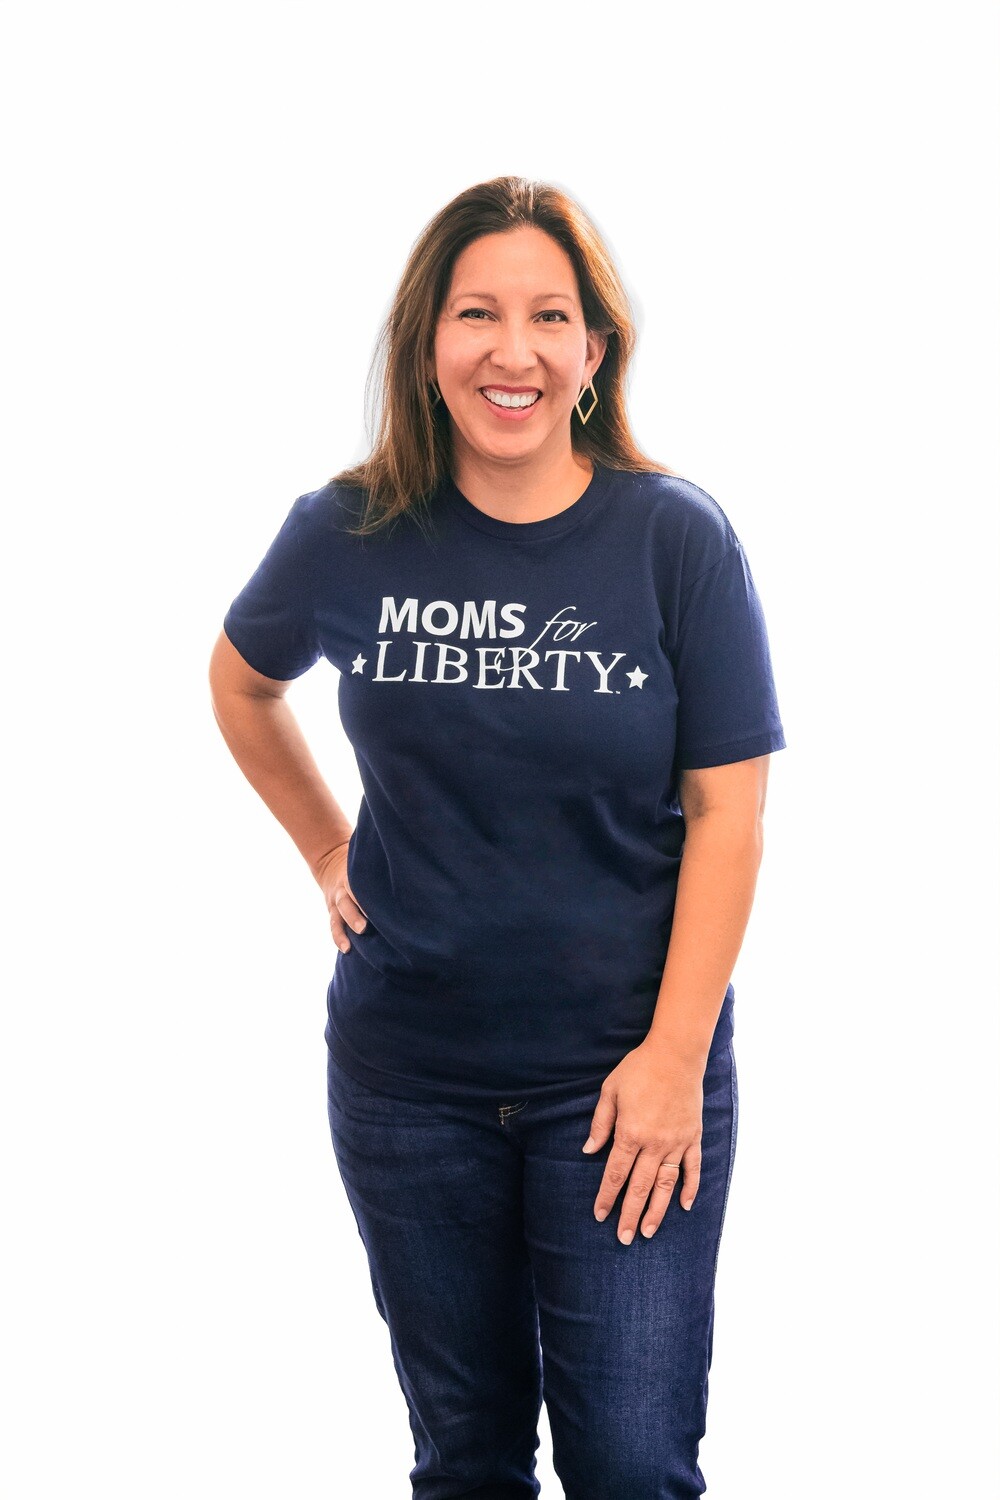 Moms for Liberty T-Shirt